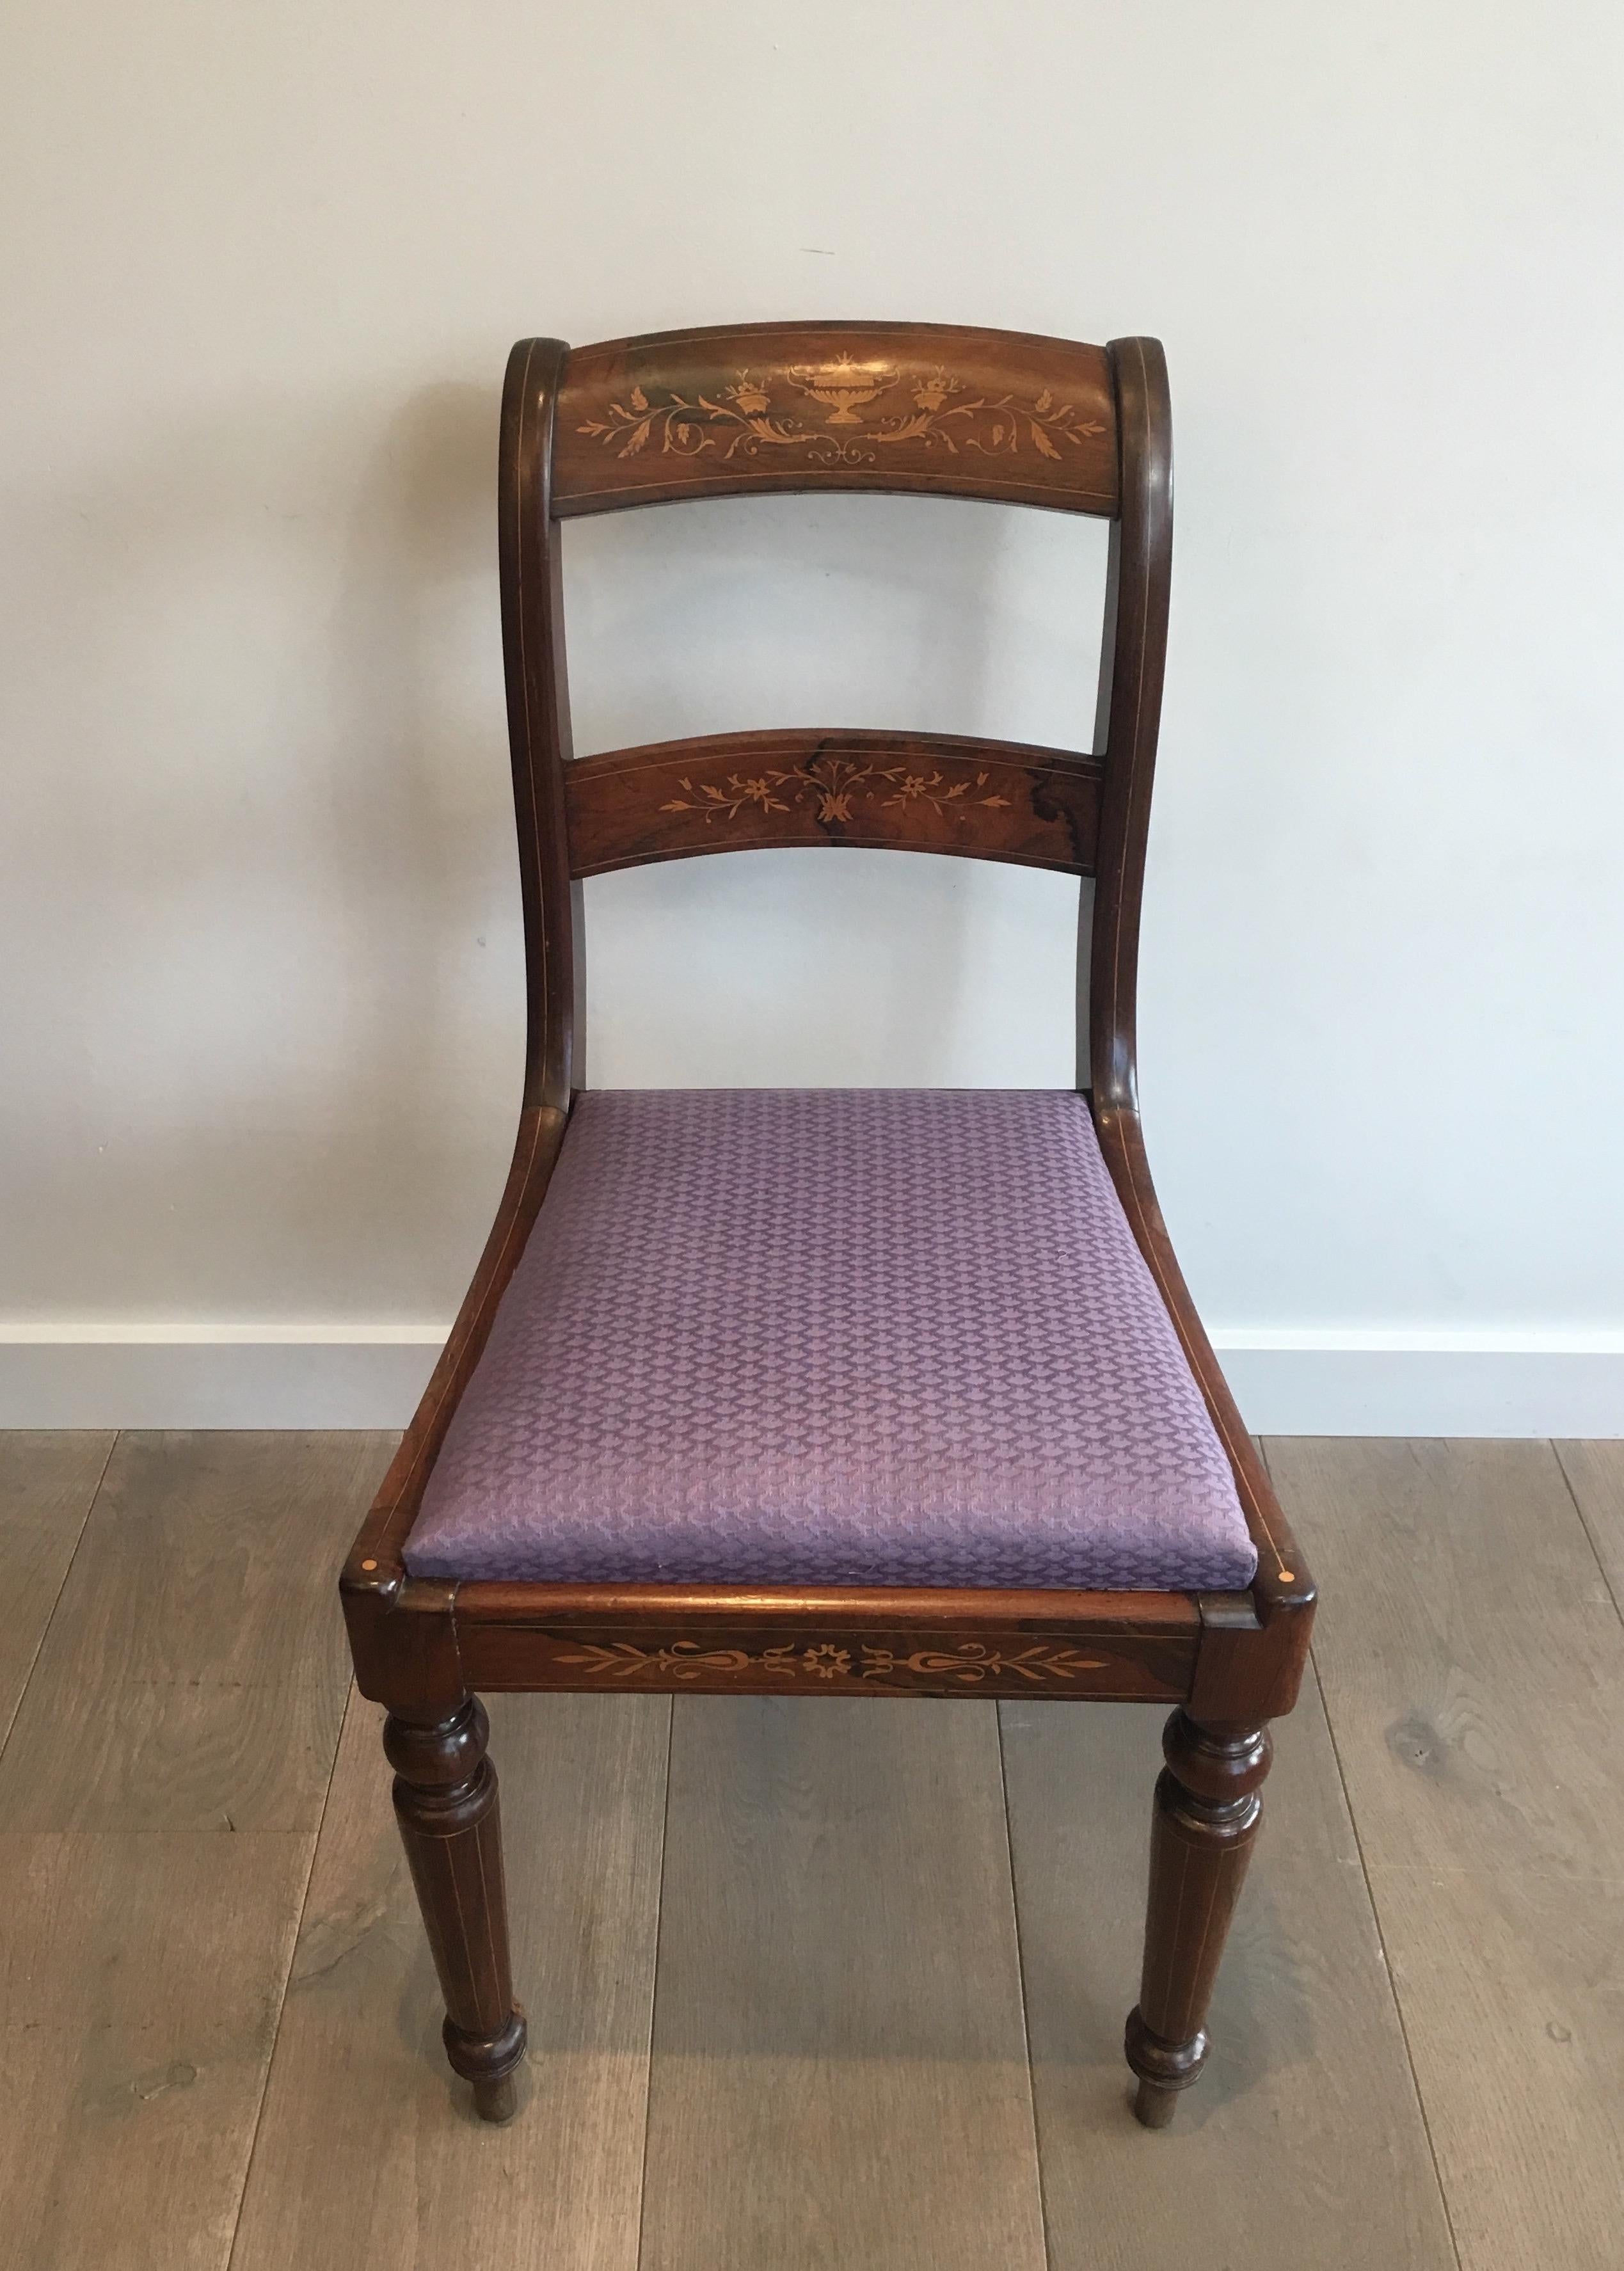 This beautiful chair is made of rosewood with lemon tree incrustations. This is a beautiful work. This chair is French, 19th century, Charles X Period. This model is attributed to famous French cabinetmaker Jeanselme. (3 of these chairs are